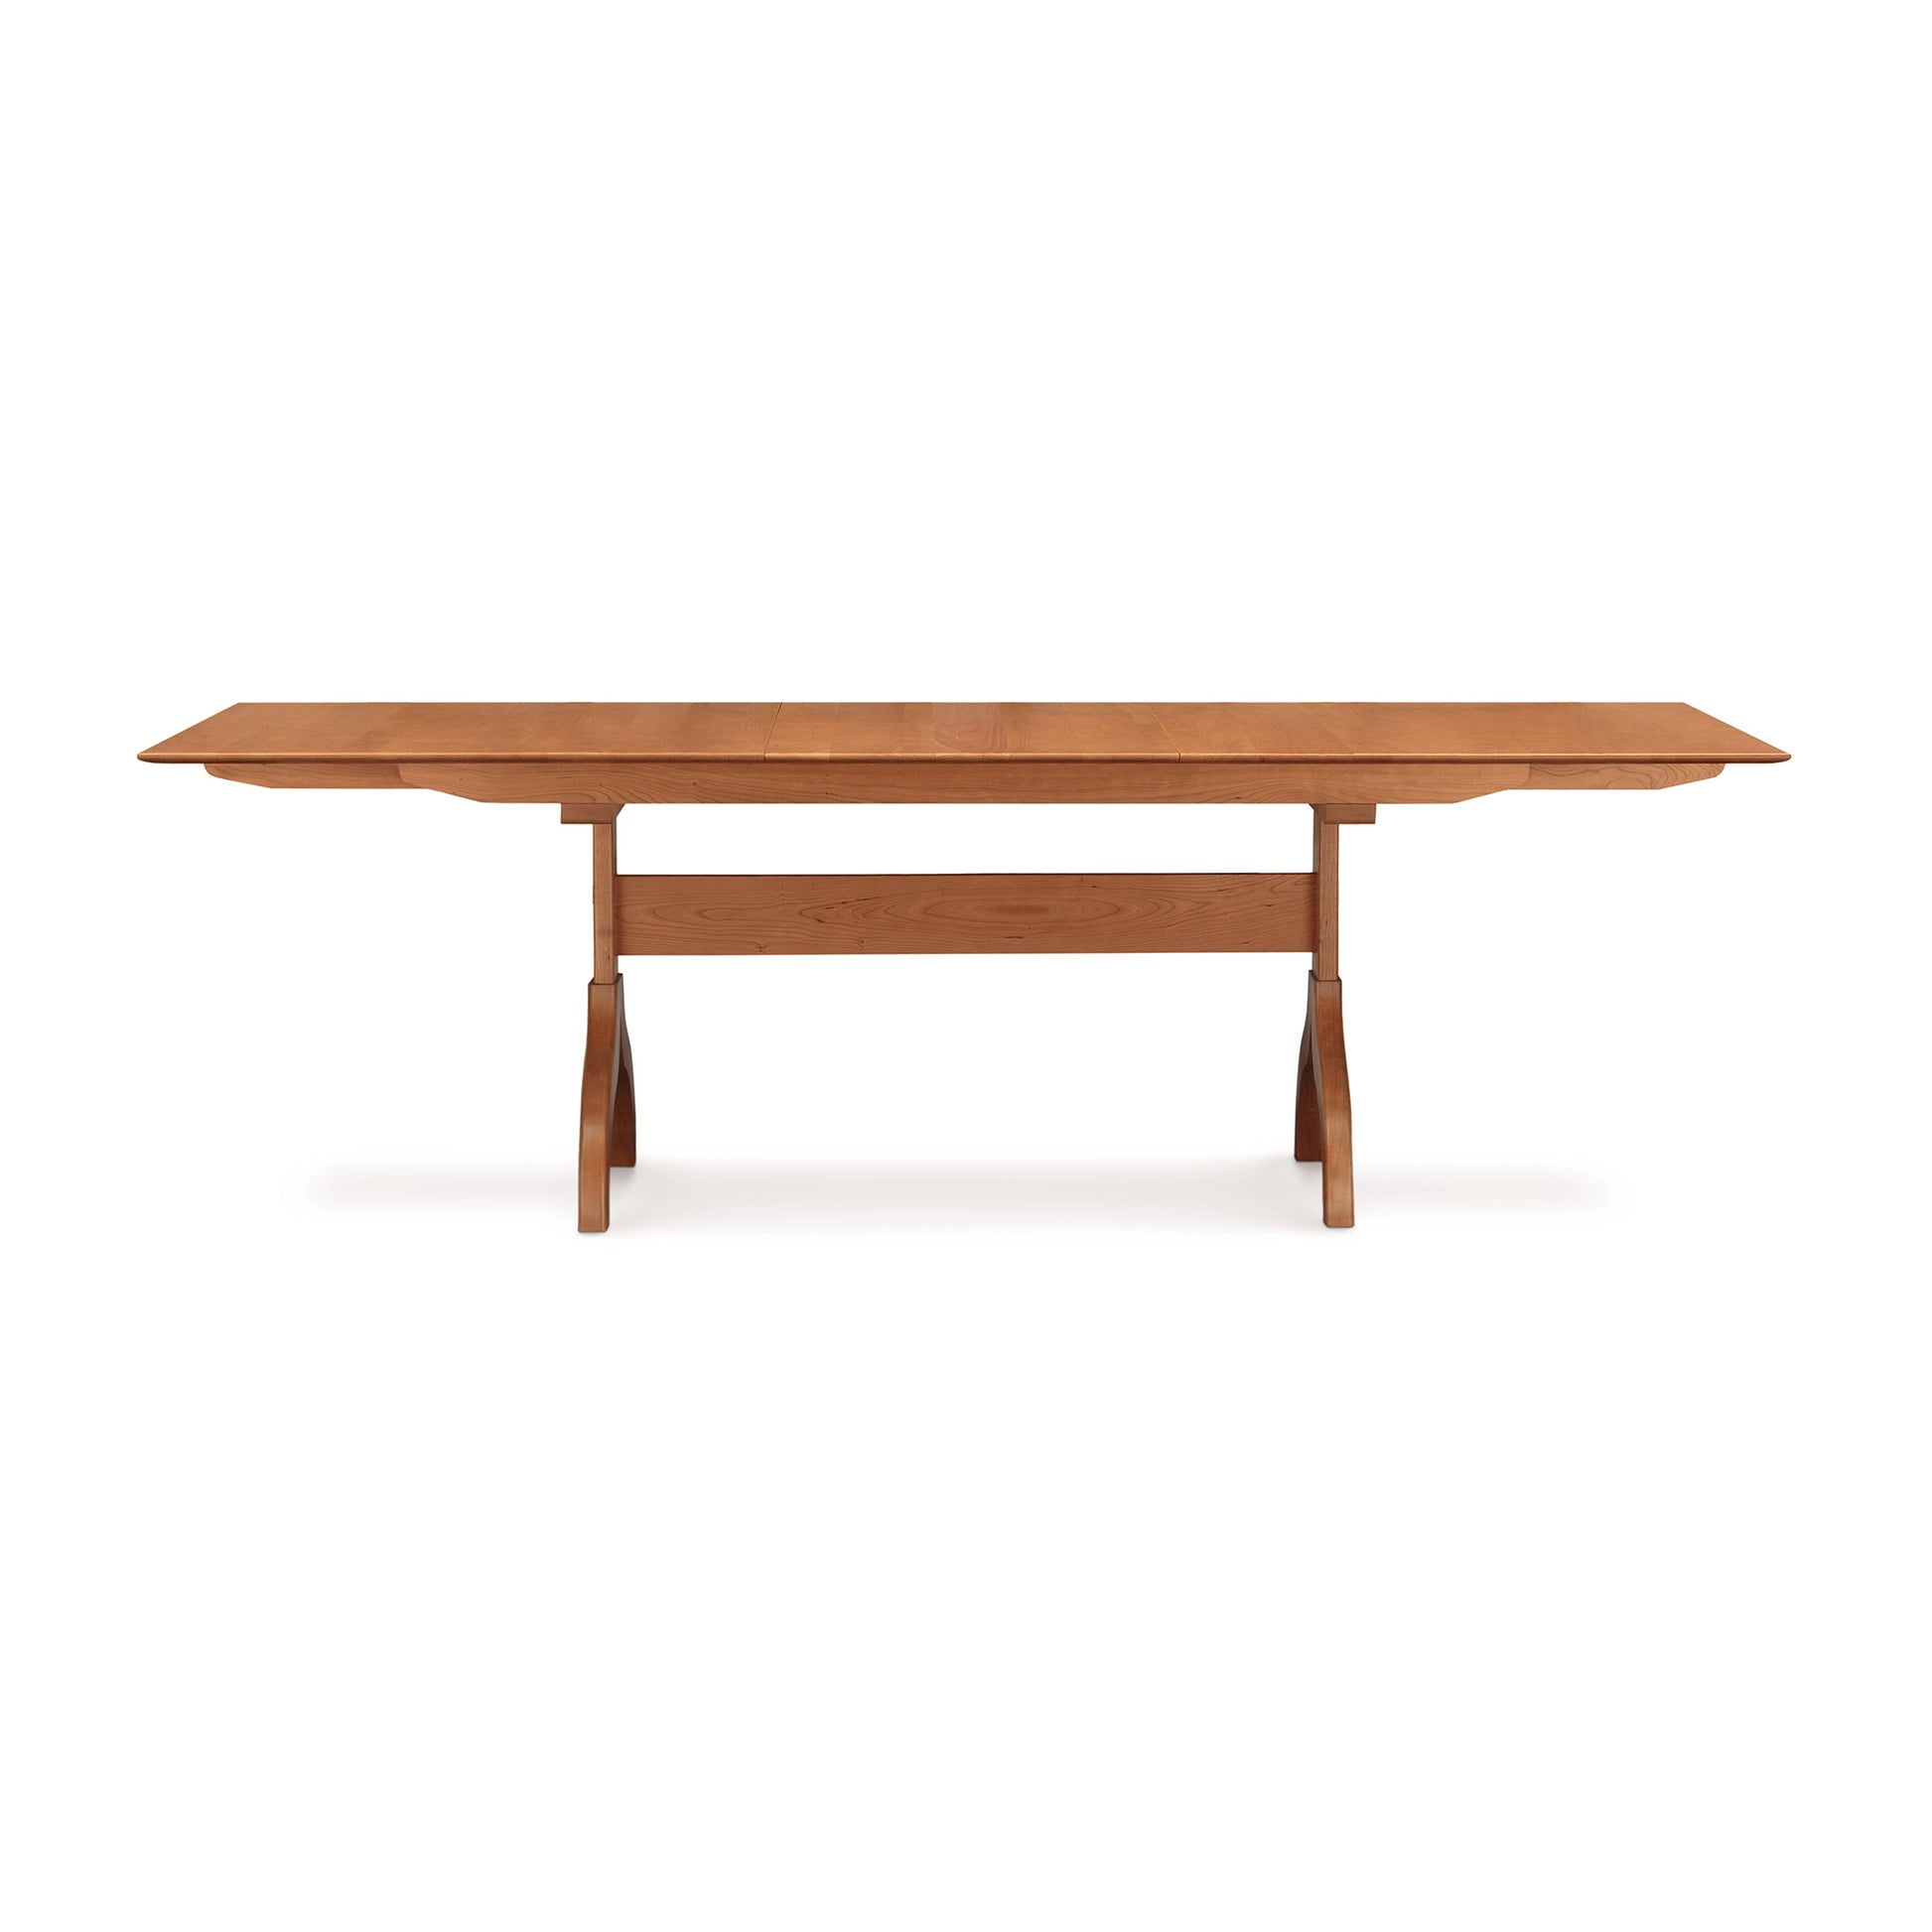 Sarah Shaker Collection cherry Copeland Furniture trestle-style extension dining table with extendable leaves on a plain background.